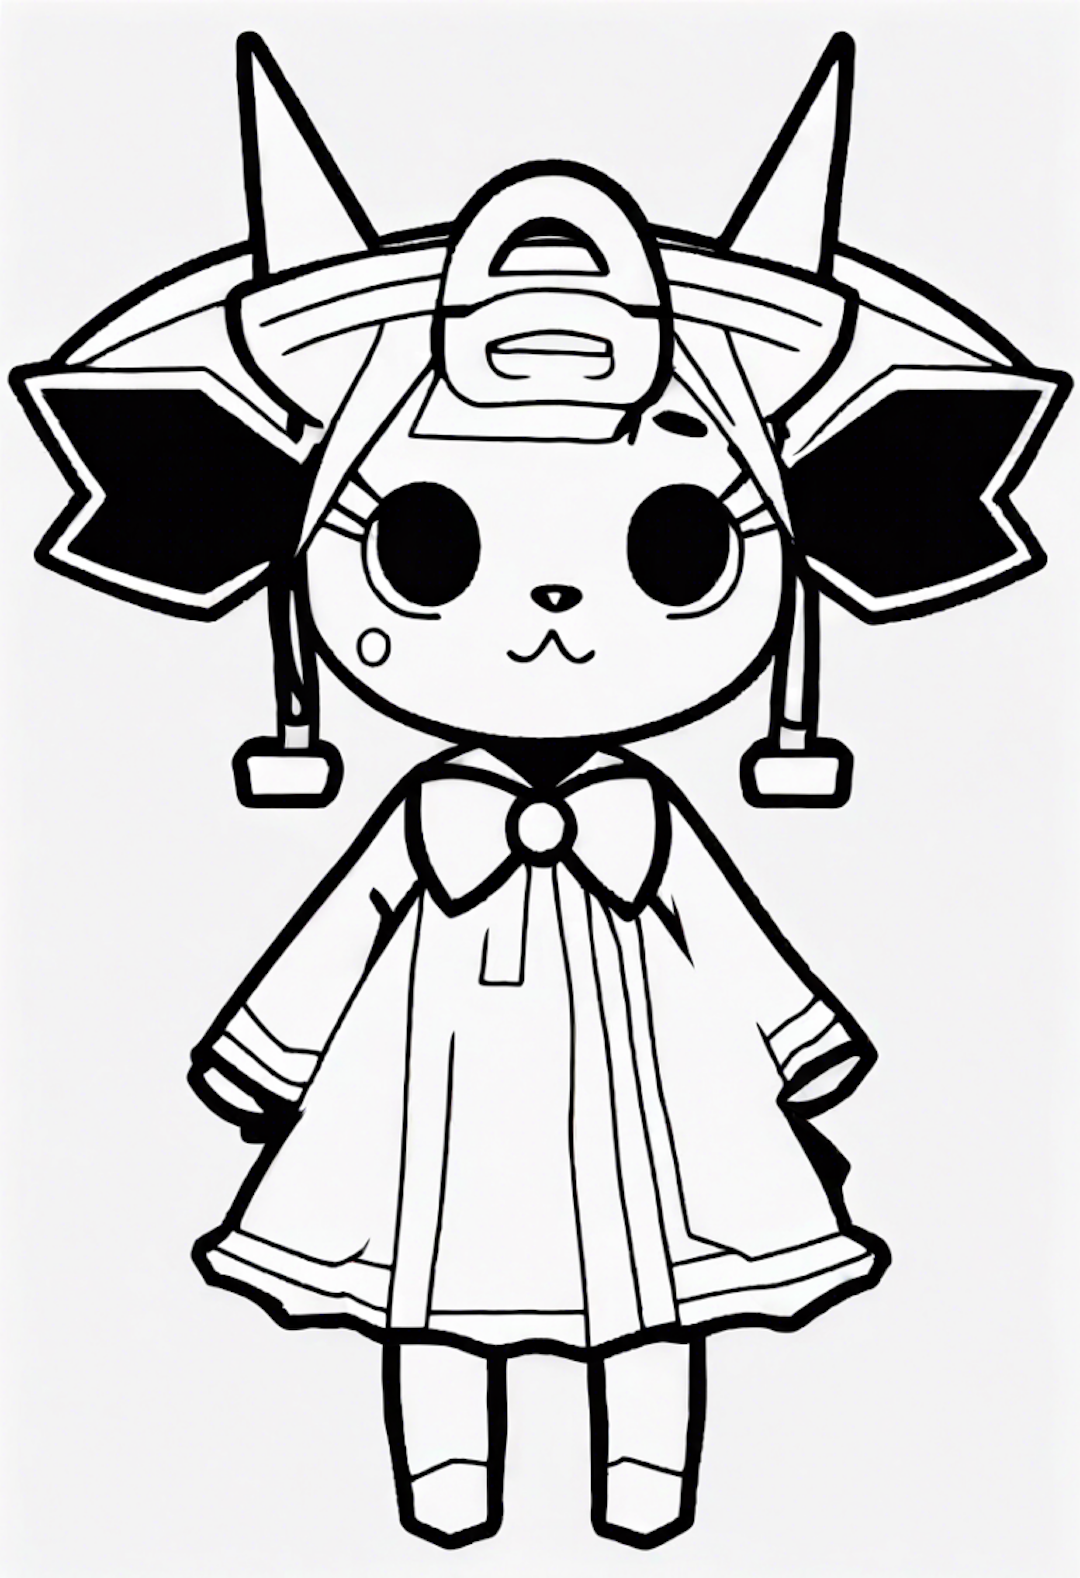 Pikachu in a Cute Costume Coloring Page coloring pages